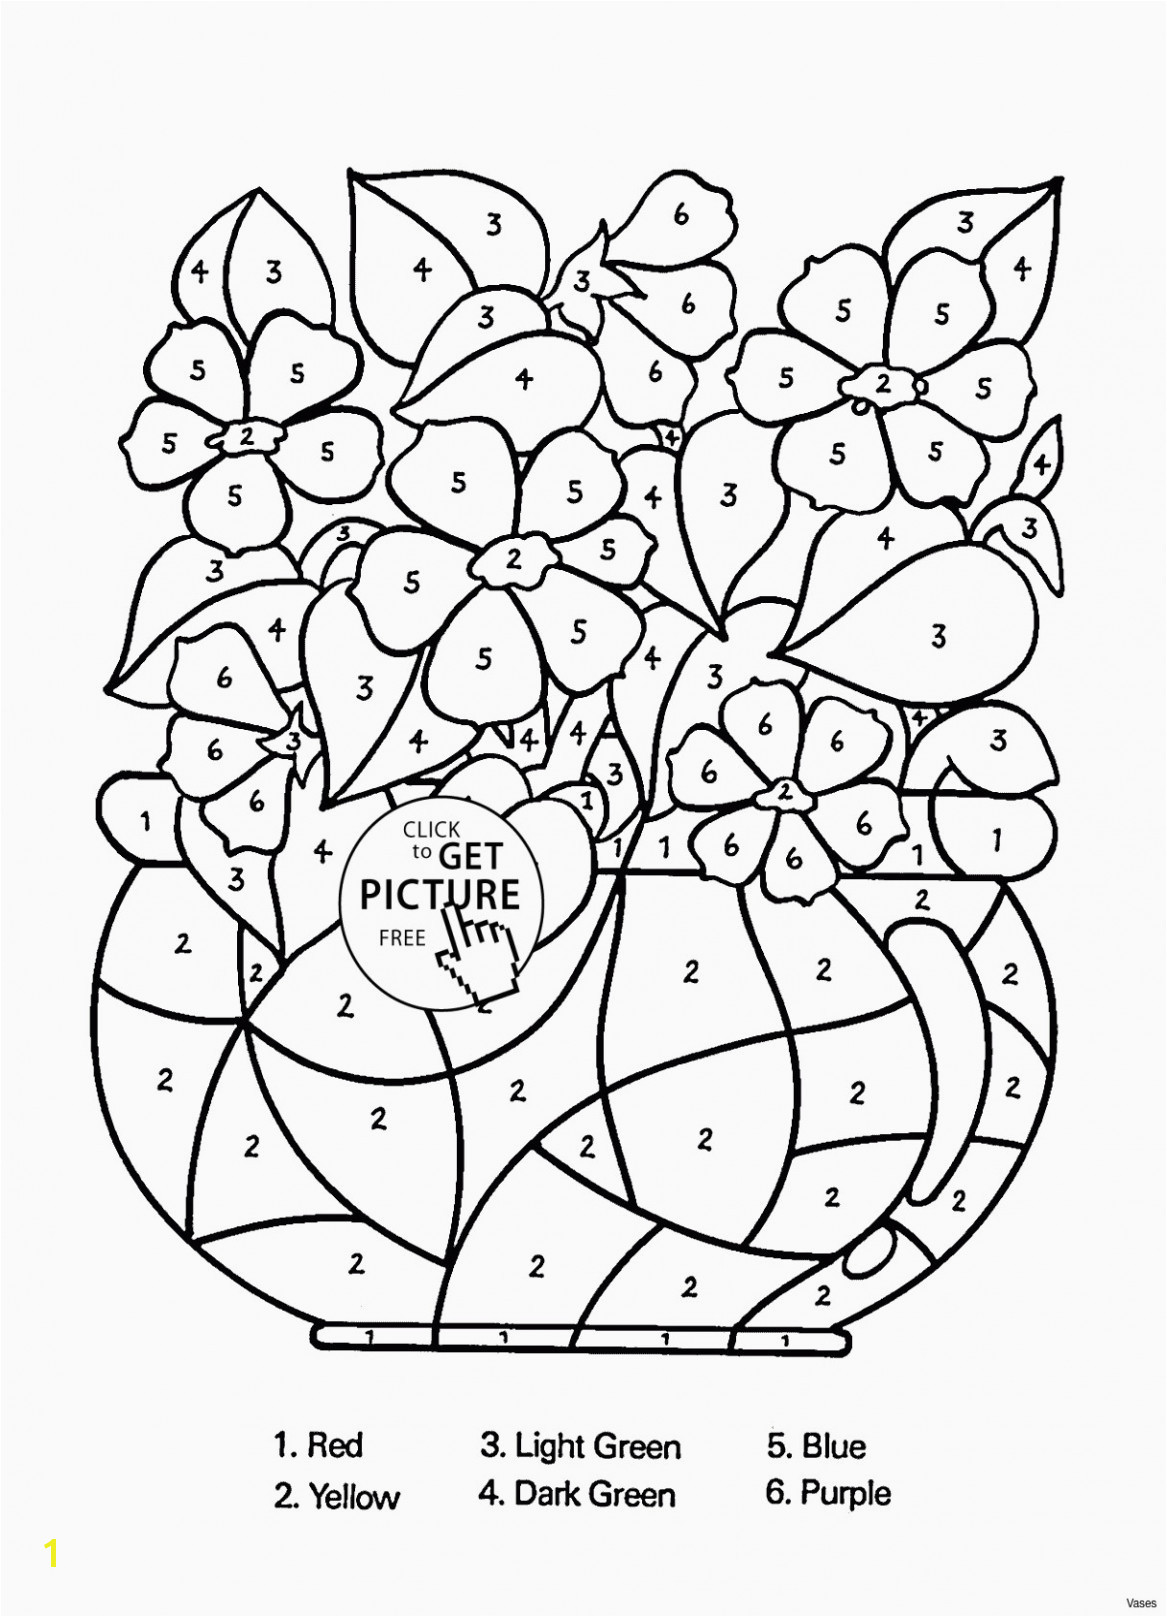 Volcano Coloring Pages Train Coloring Pages Lovely Vases Flower Vase Coloring Page Pages Flowers In A